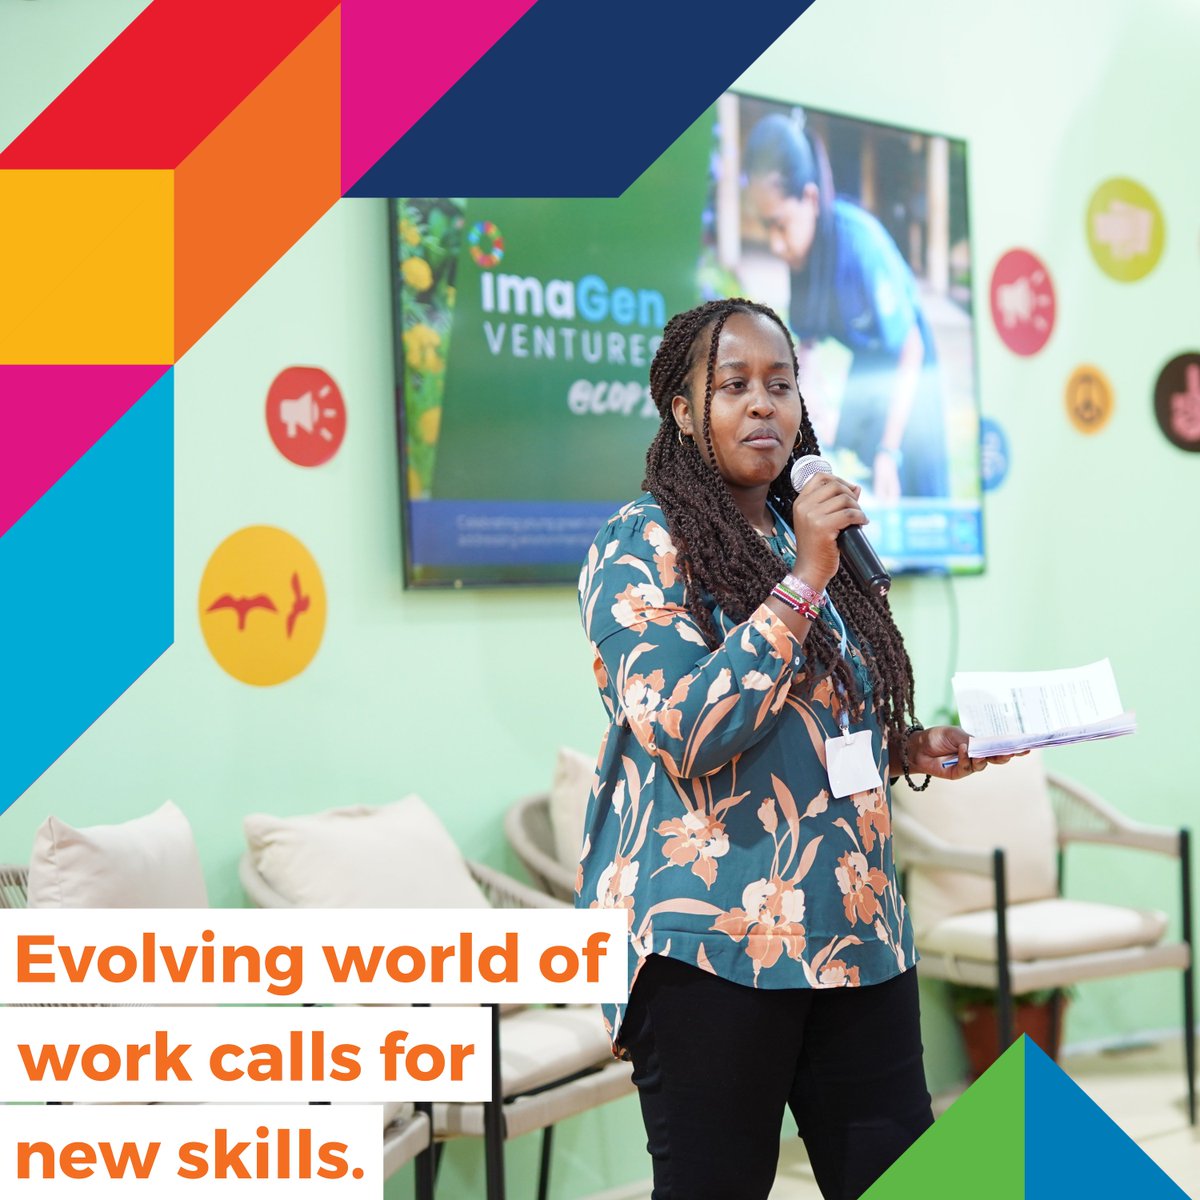 Youth with the right #SkillsRightNow are a catalyst for positive change!

Lawyer and YEO 2030 Program Manager Vicky Aridi helps other young leaders across the globe gain access to decent and sustainable economic opportunities.

#YouthSkillsDay